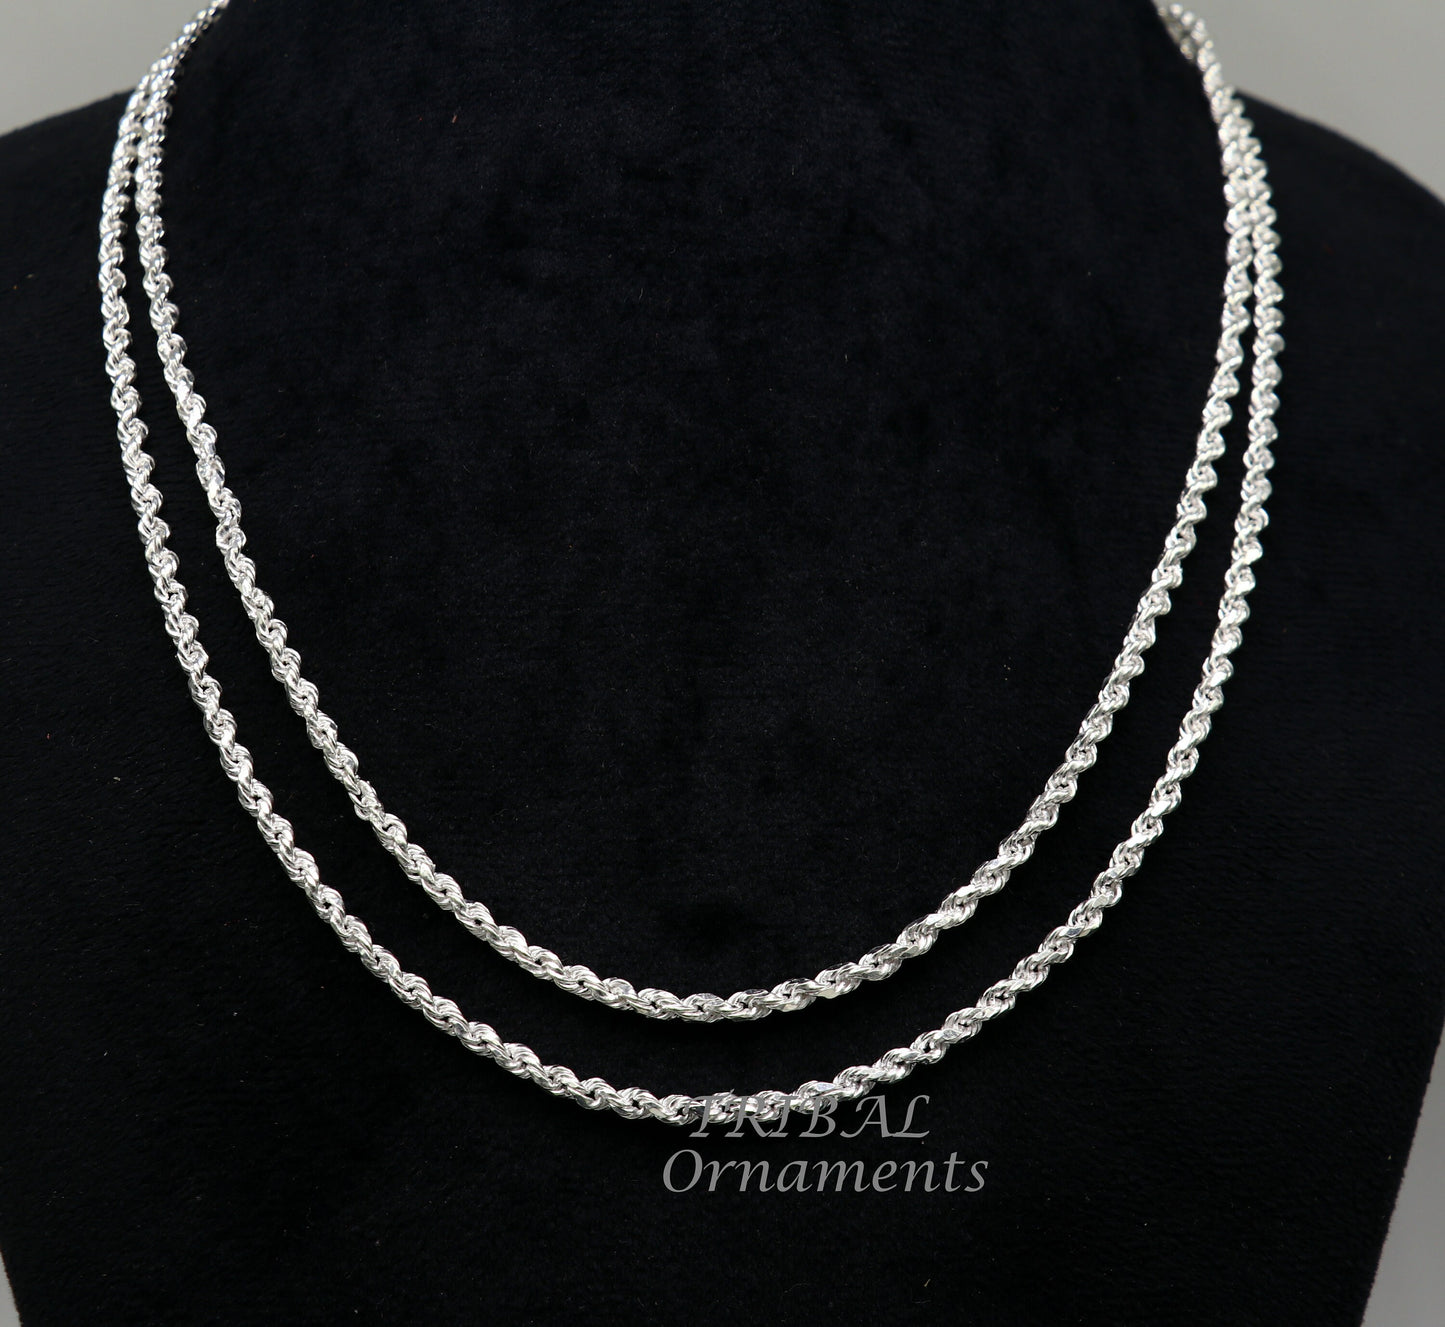 19" TO 21" Rope chain 925 sterling silver handmade single rope chain chain, necklace chain, plain bright silver chain trendy style ch506 - TRIBAL ORNAMENTS